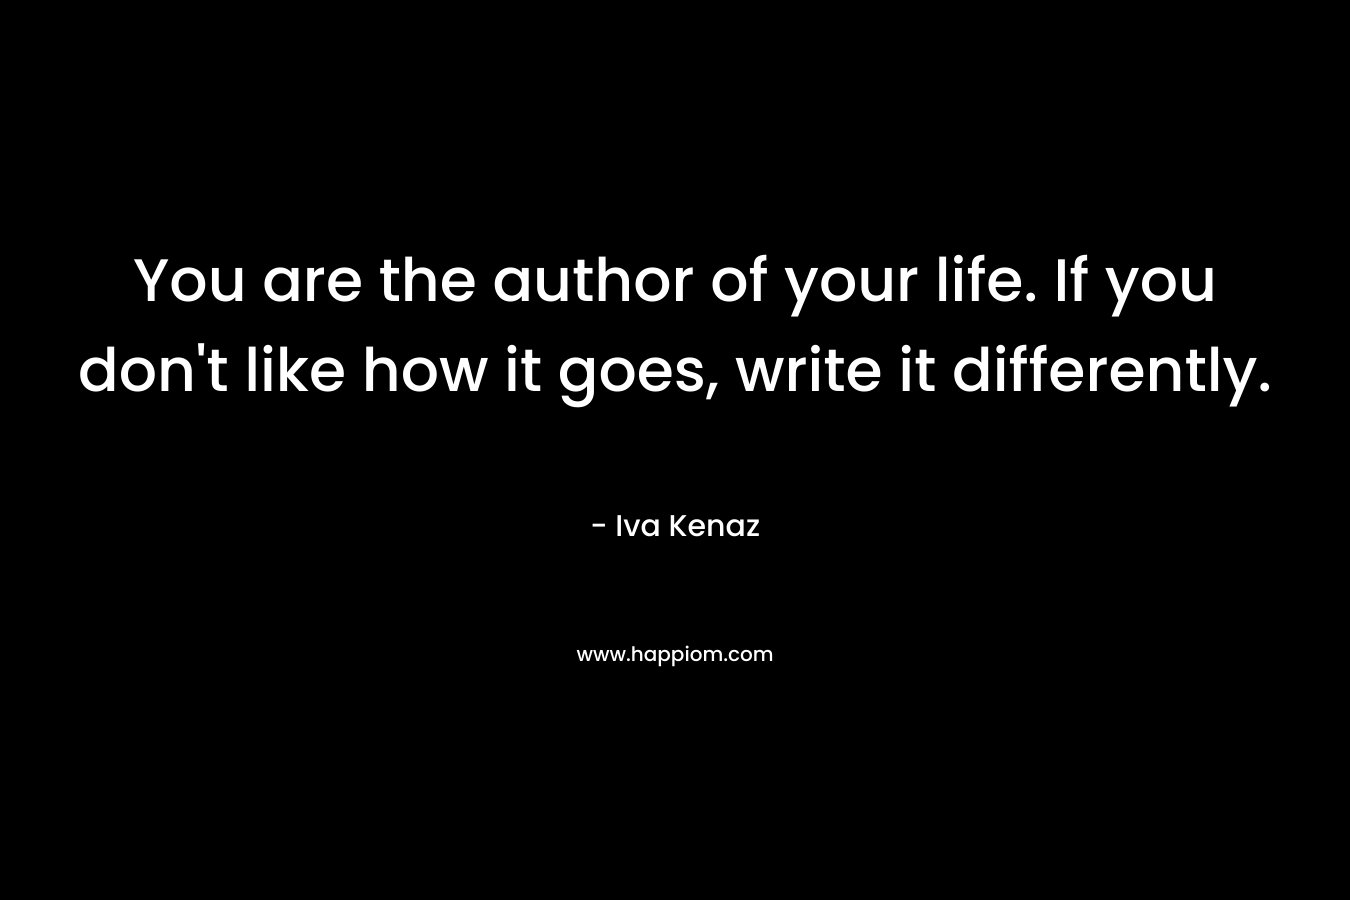 You are the author of your life. If you don't like how it goes, write it differently.